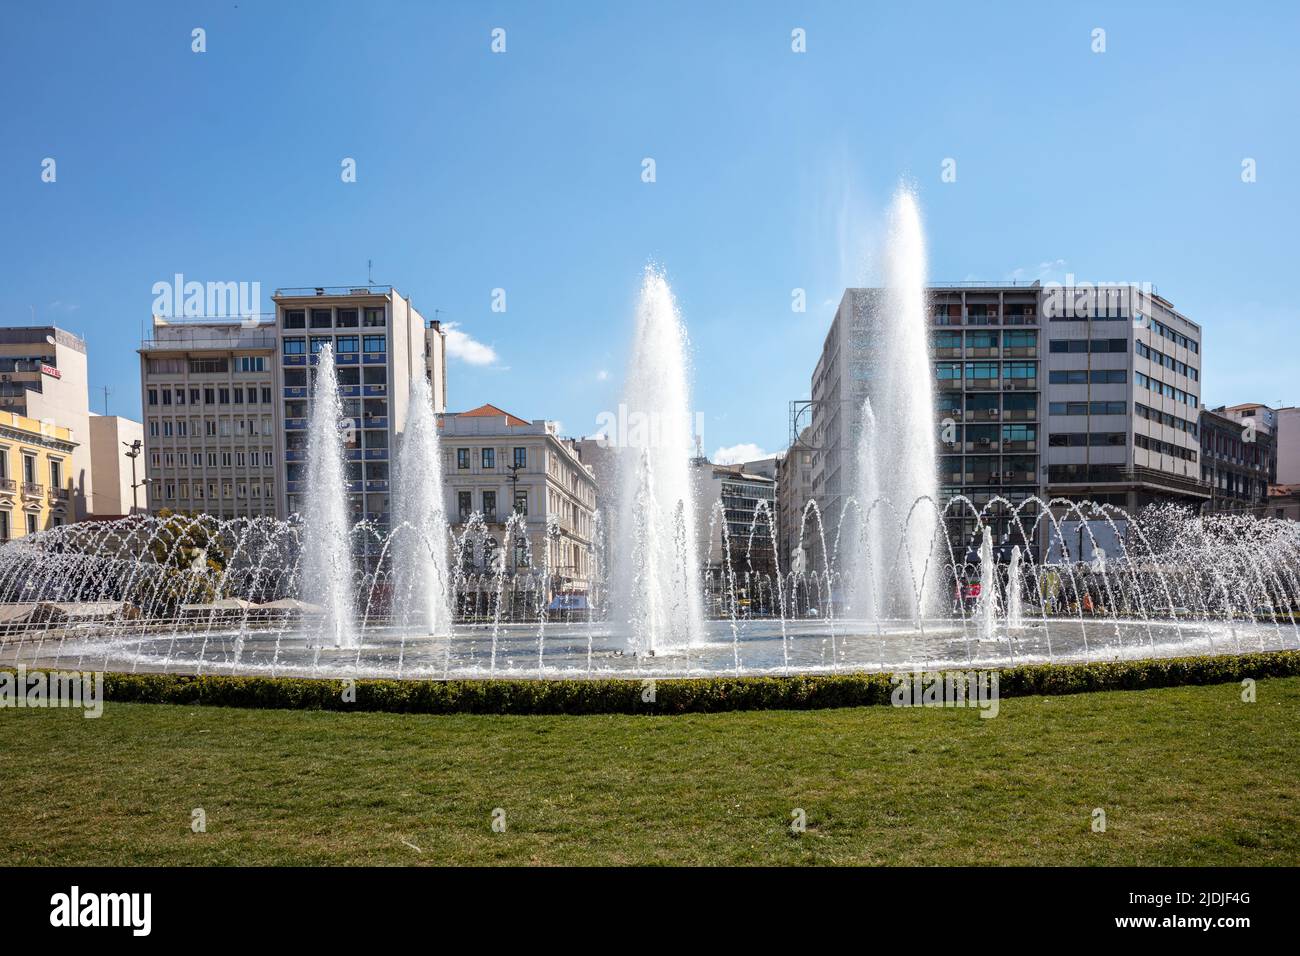 Omonoia Square, New water fountain in Athens, Greece. Omonia is a round plaza in the city center, sunny day, blue sky. Stock Photo